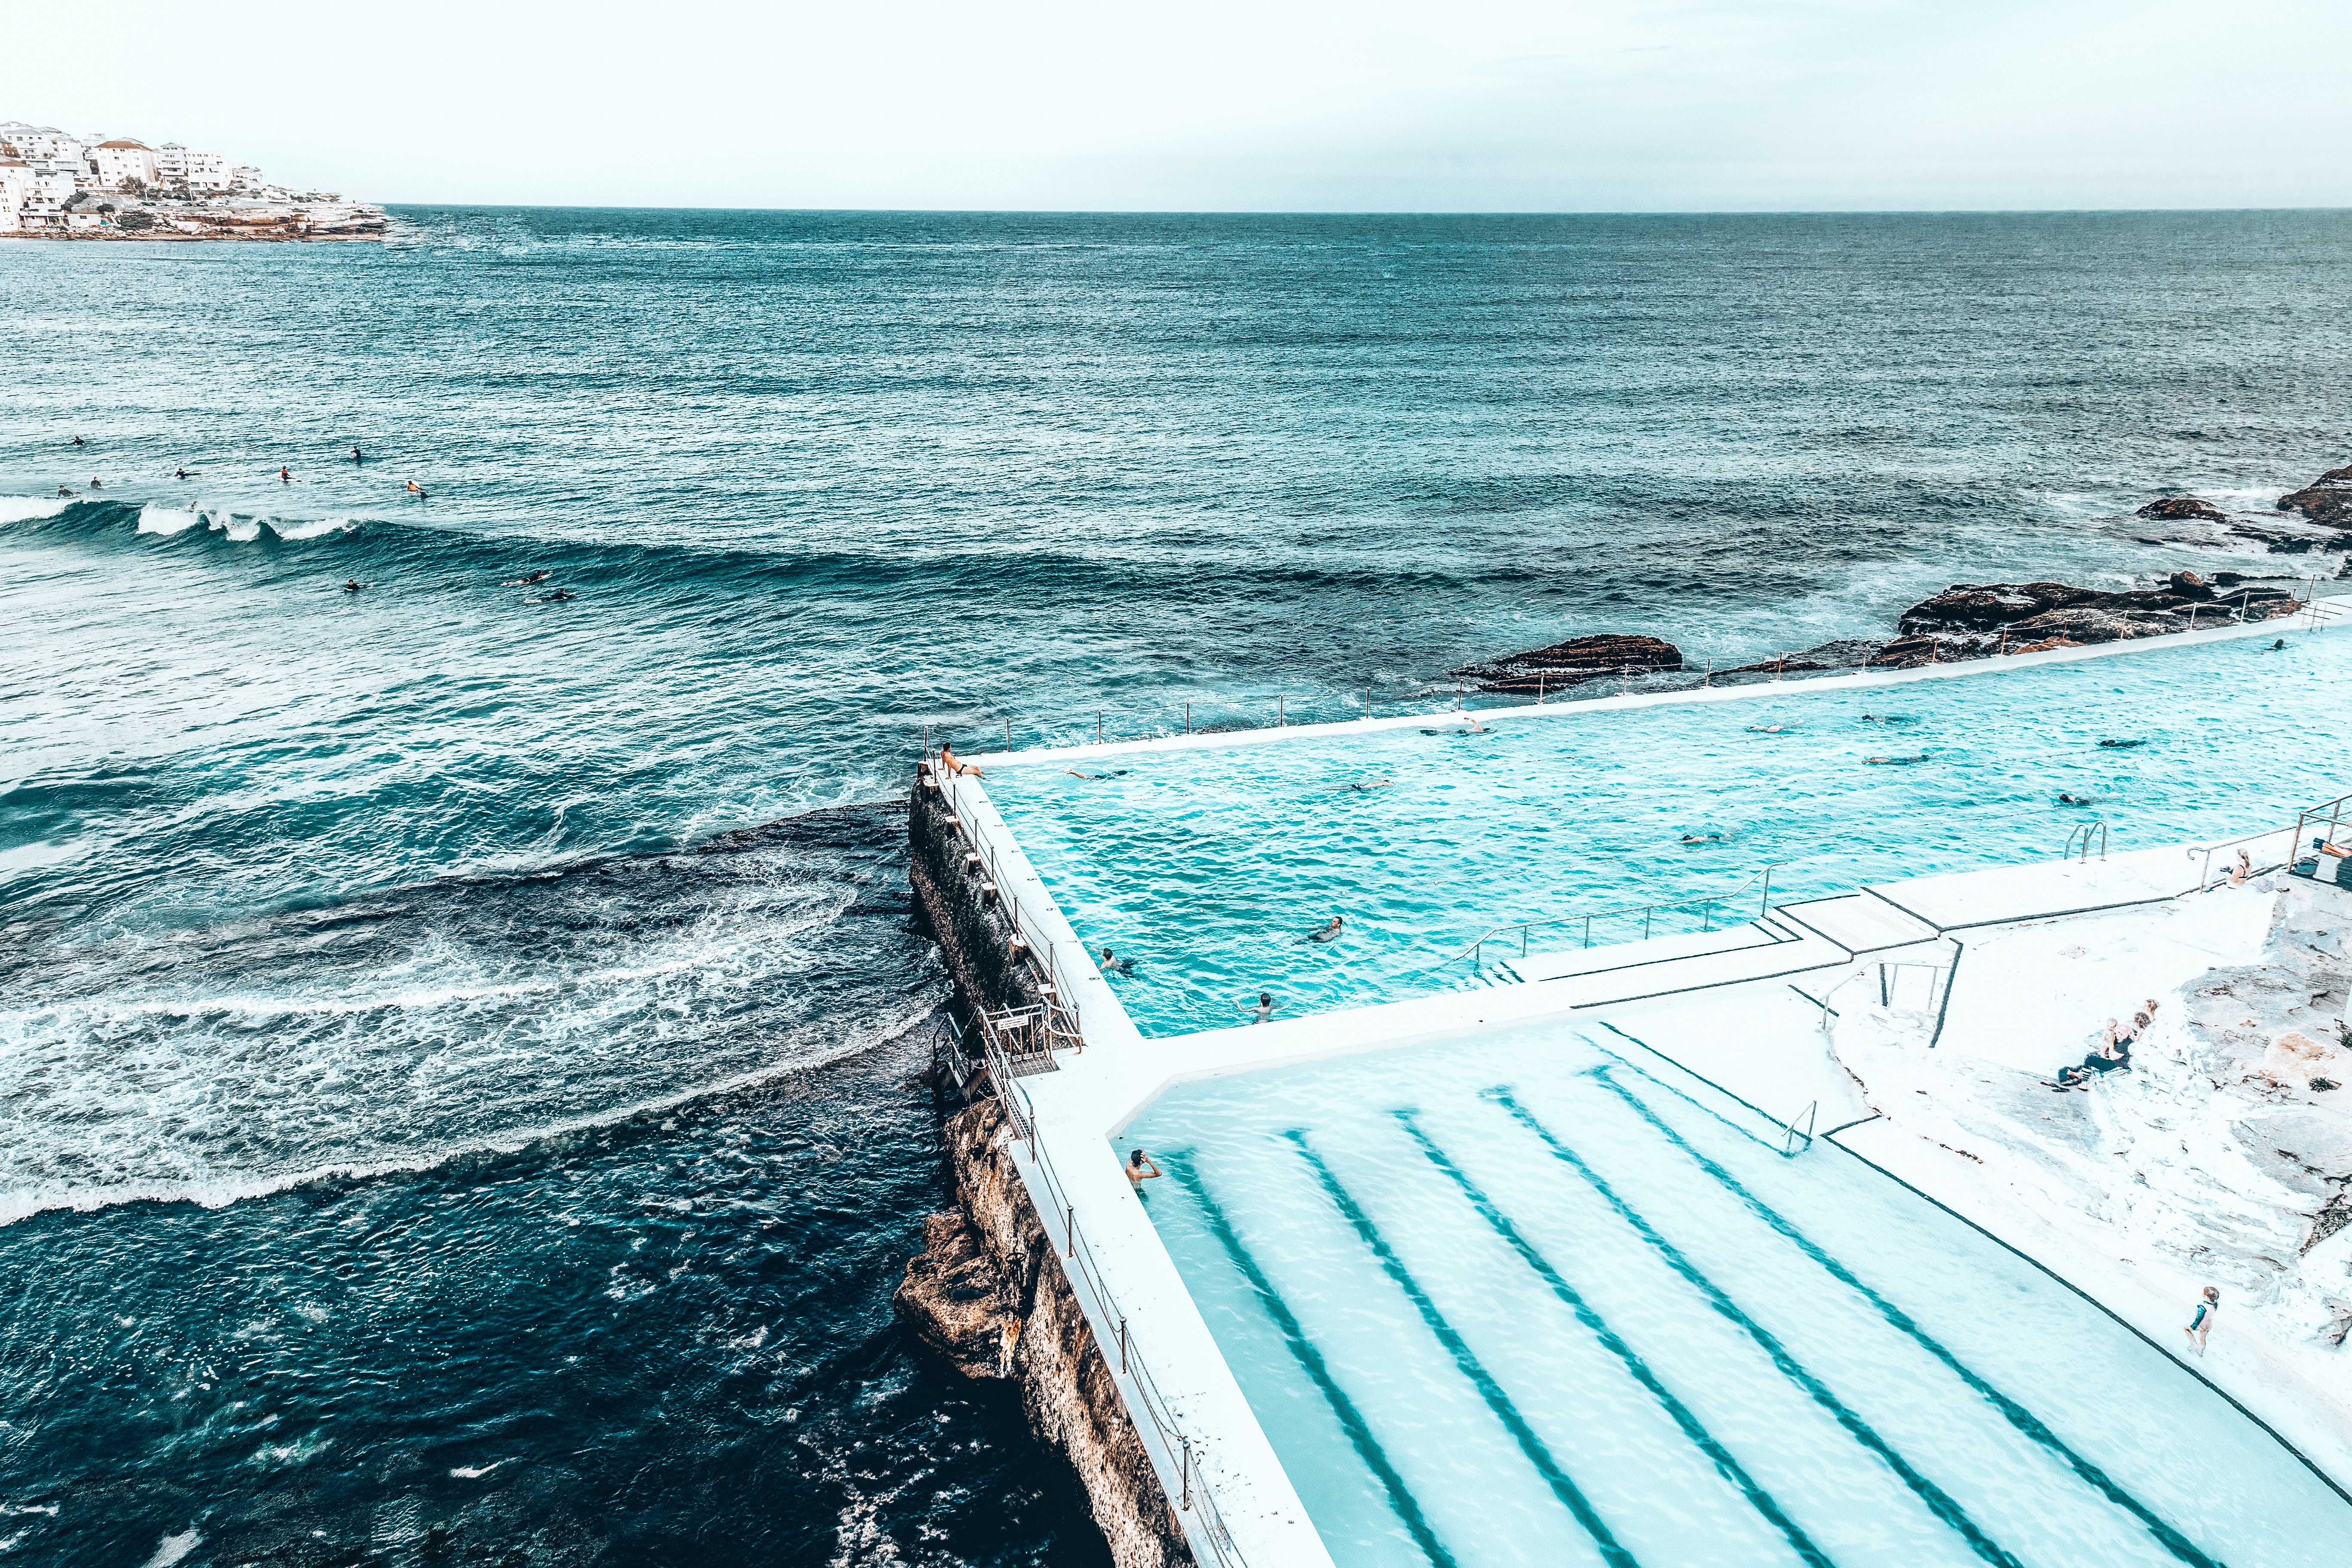 Image of Bondi Beach swimming pool taken from above and overlooking the ocean